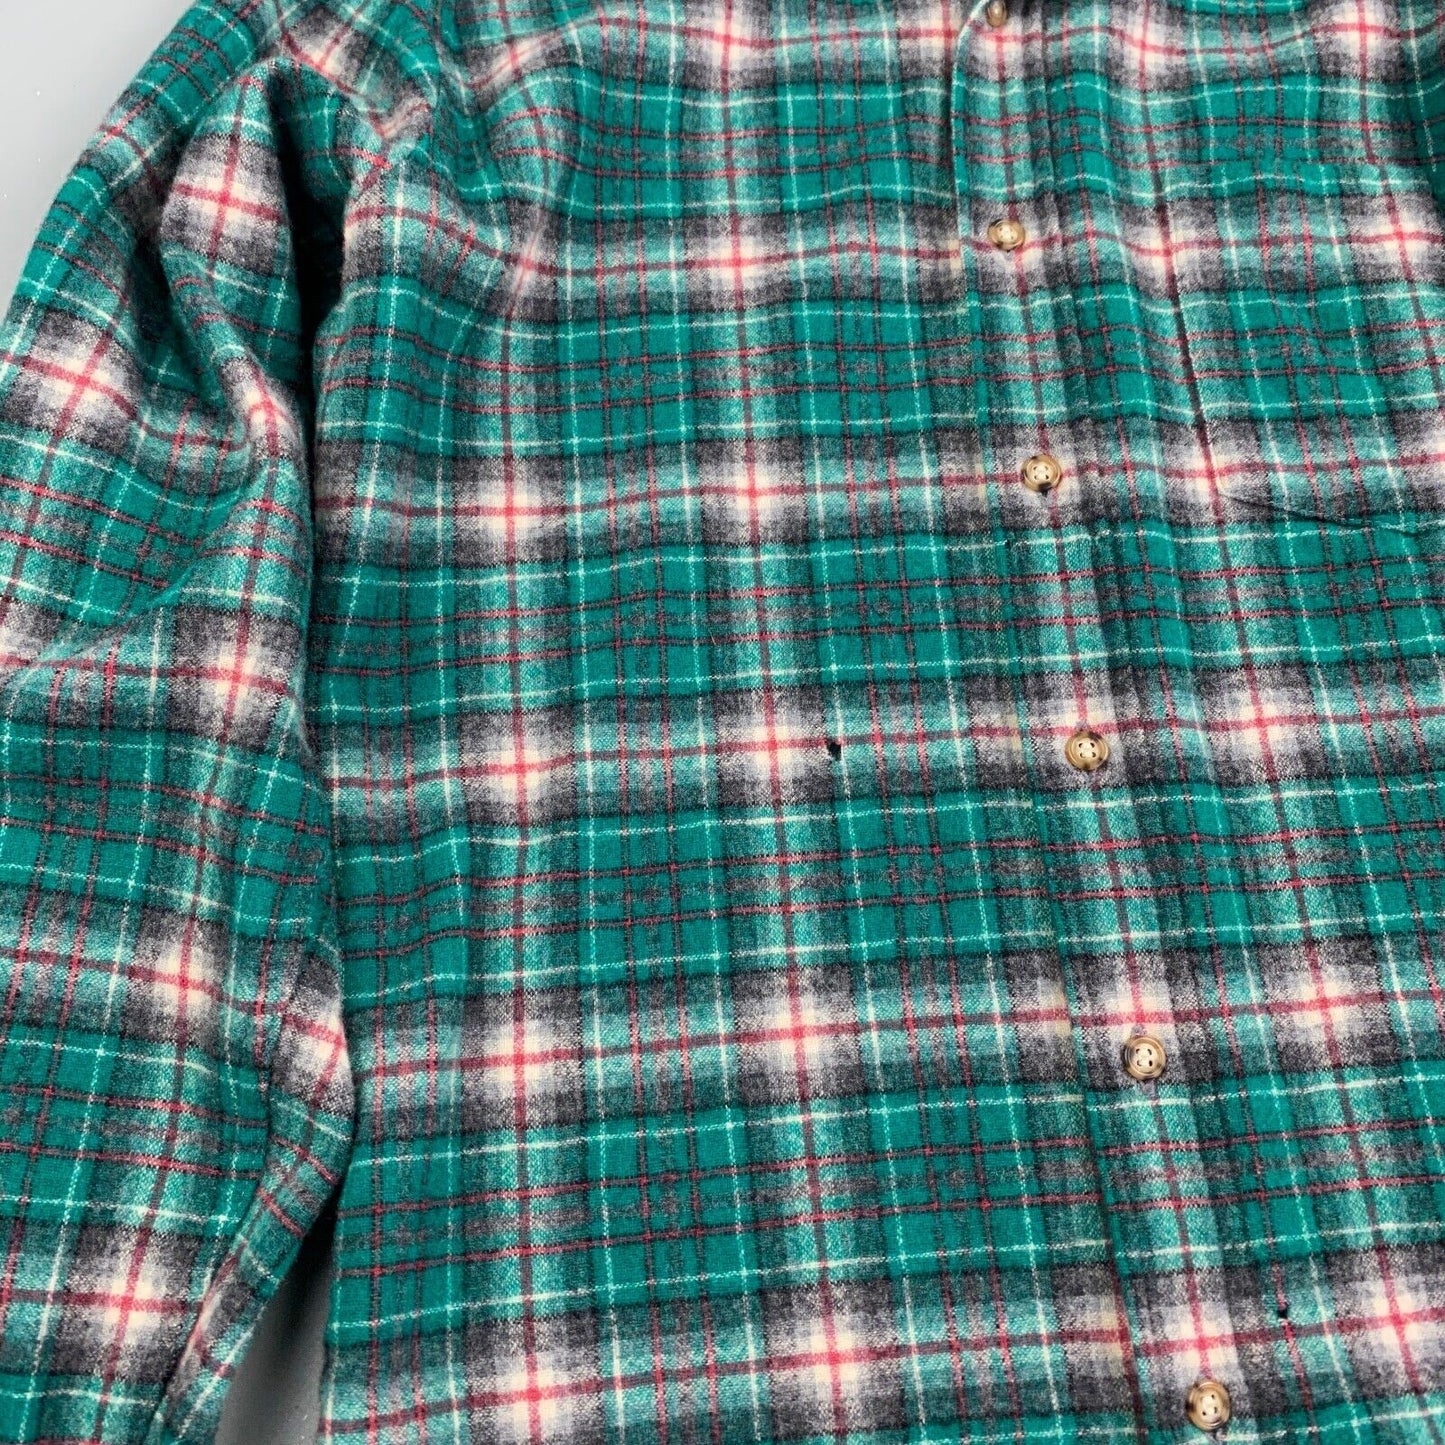 VINTAGE 90s Pendleton Green Wool Plaid Flannel Button Up Shirt sz Small Adult